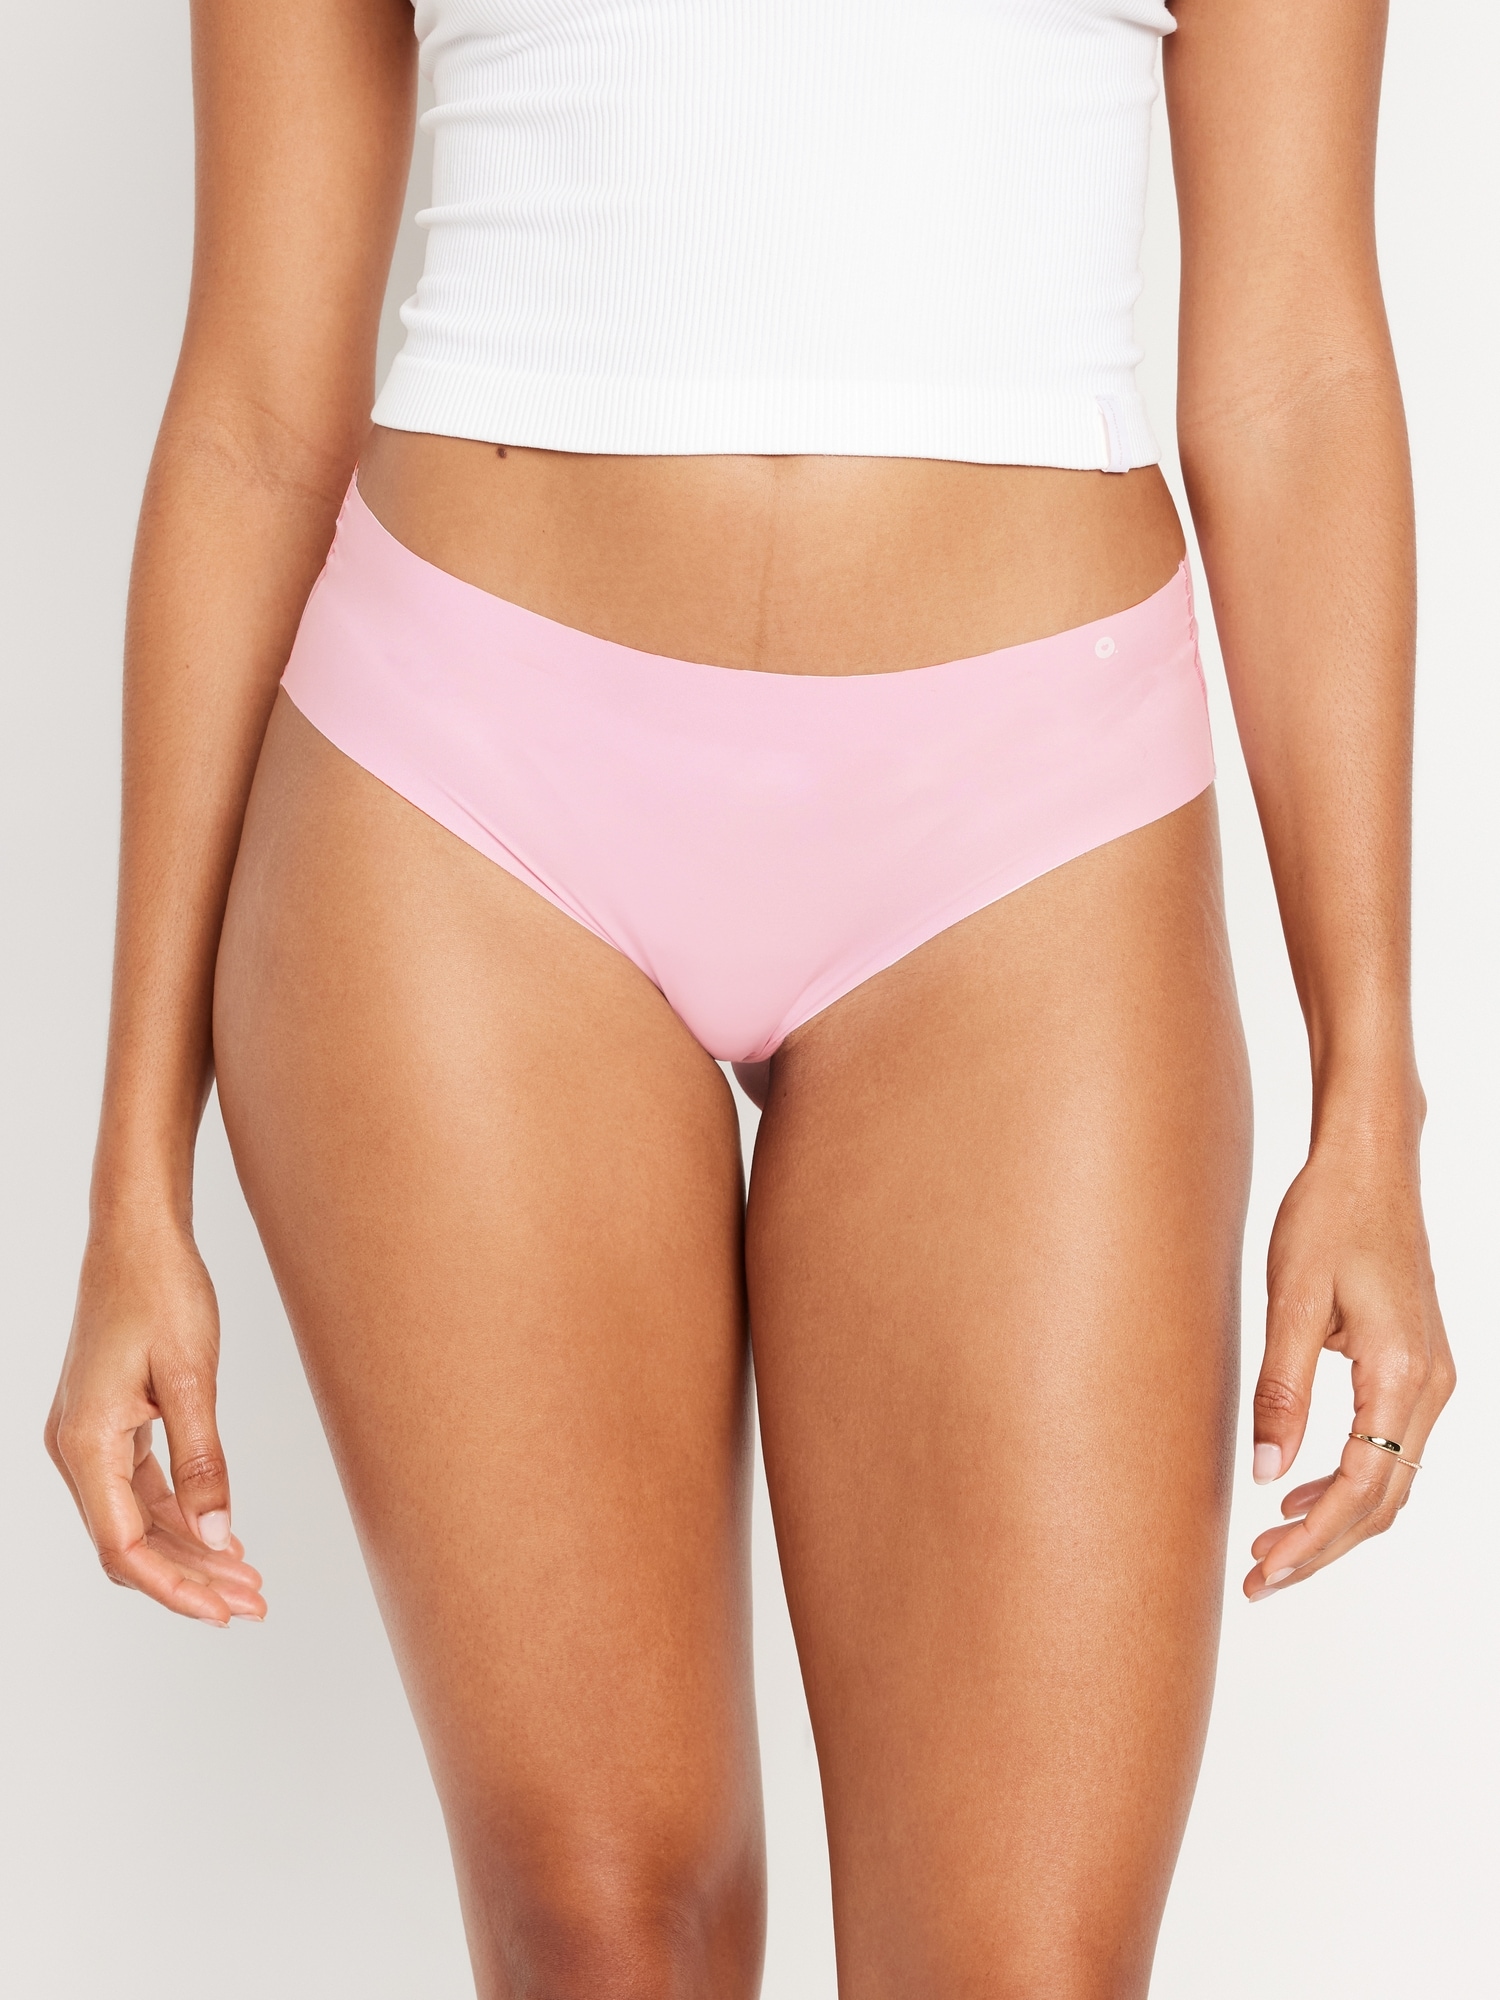 Negative Underwear - A cheeky sort of Monday. The Cotton French